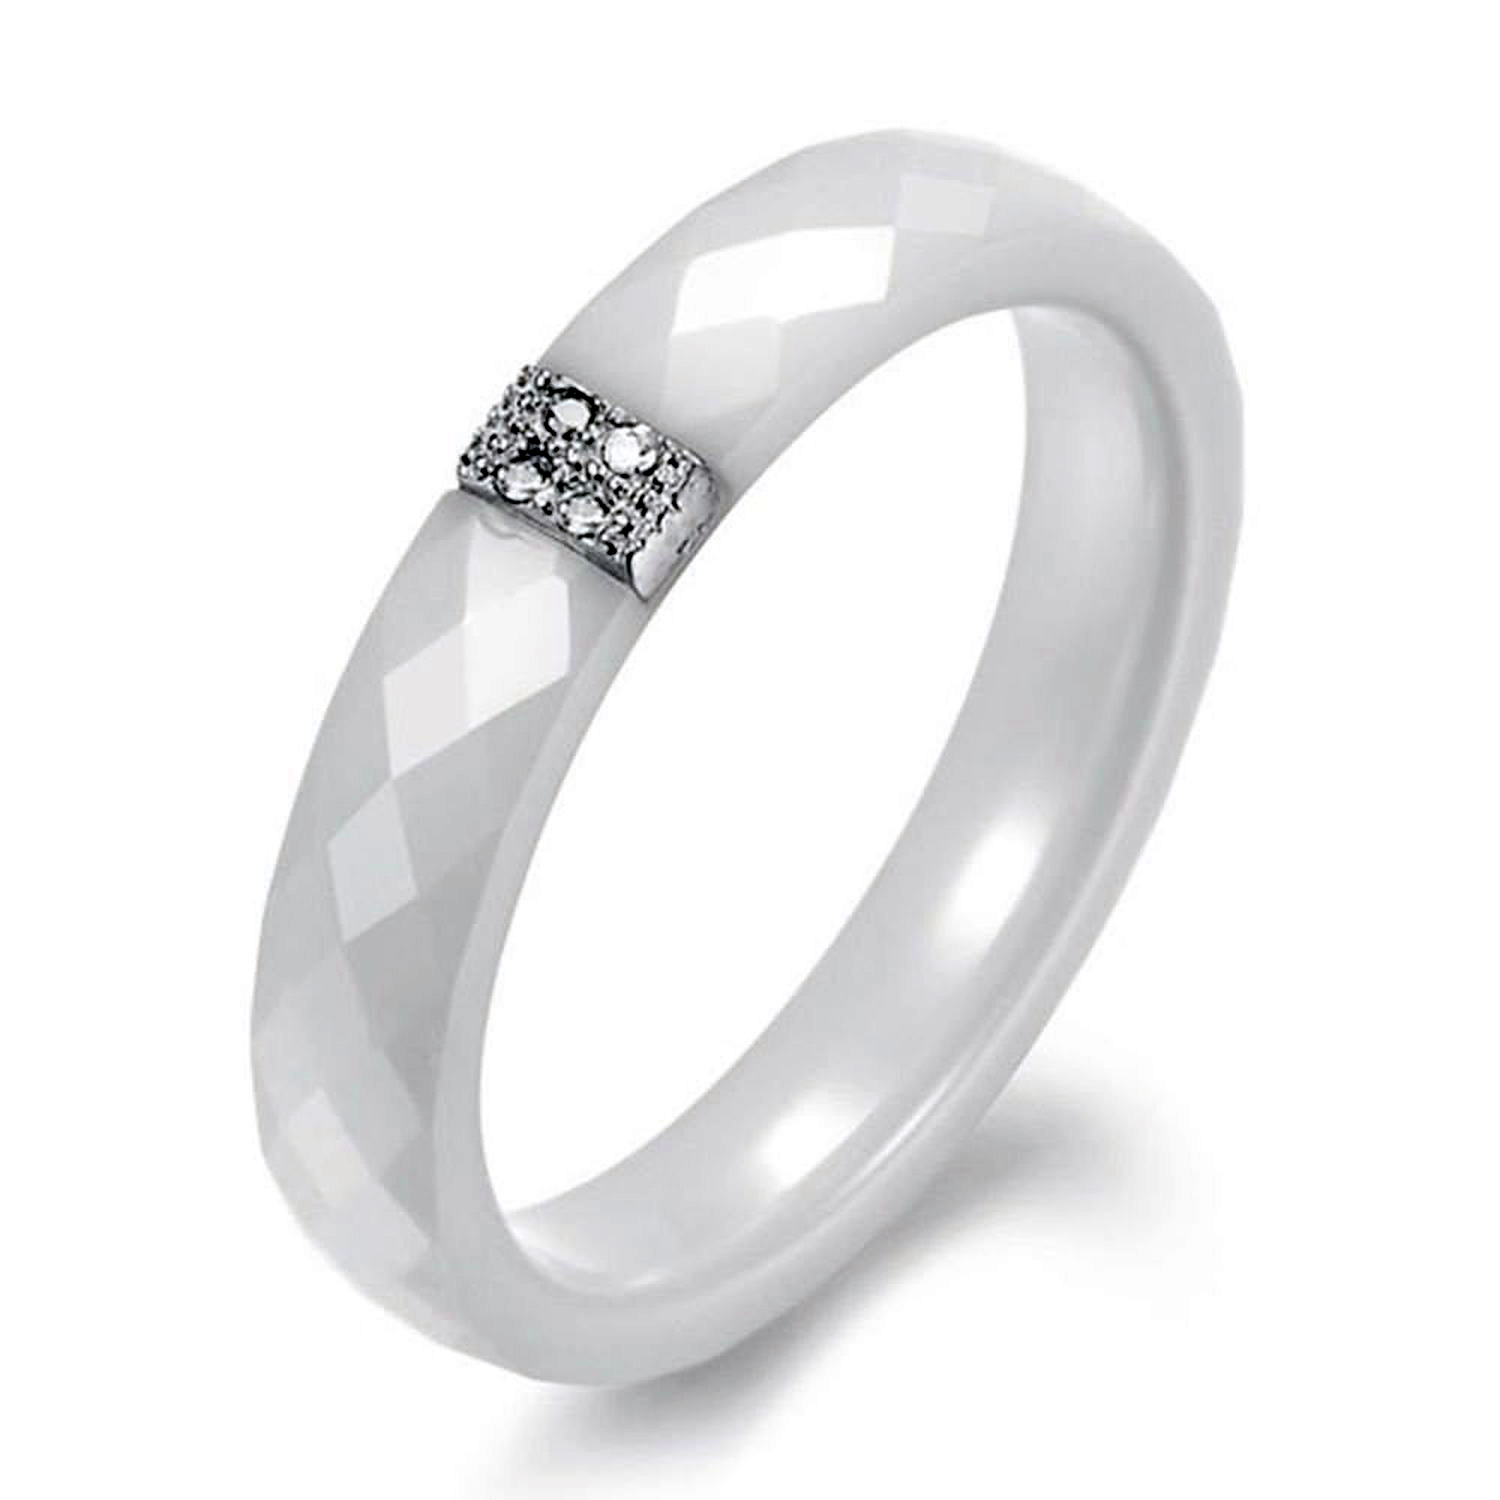 4mm White ceramic with Sterling Silver Plated Platinum Crystal Ring Size 6_WBC - $3.95